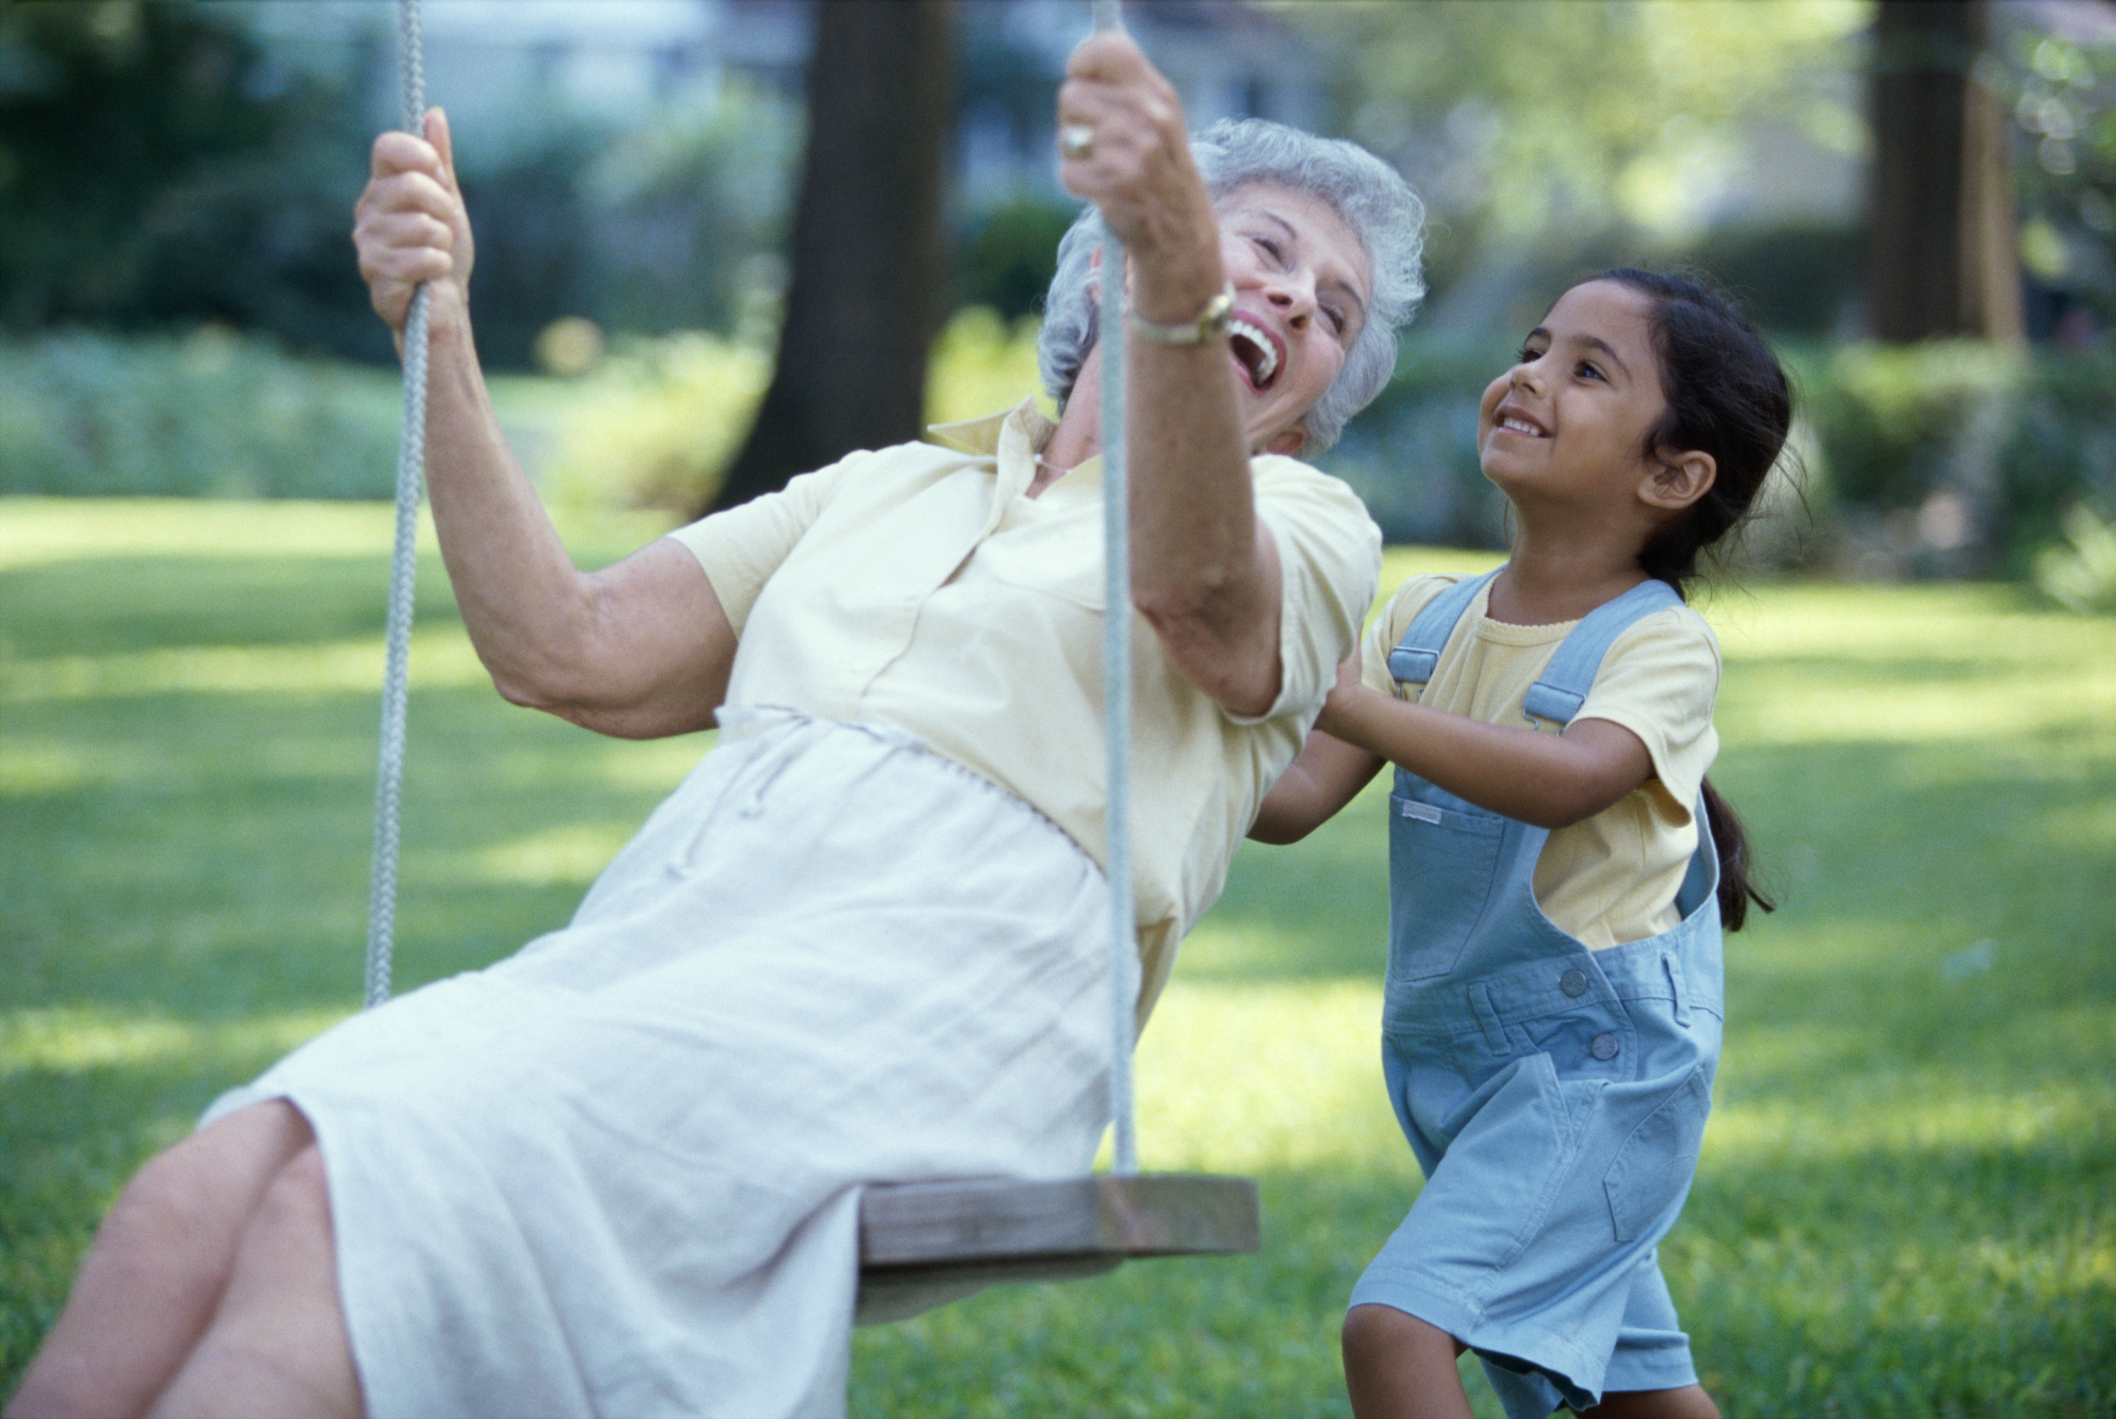 A granddaughter pushing her grandmother on a swing